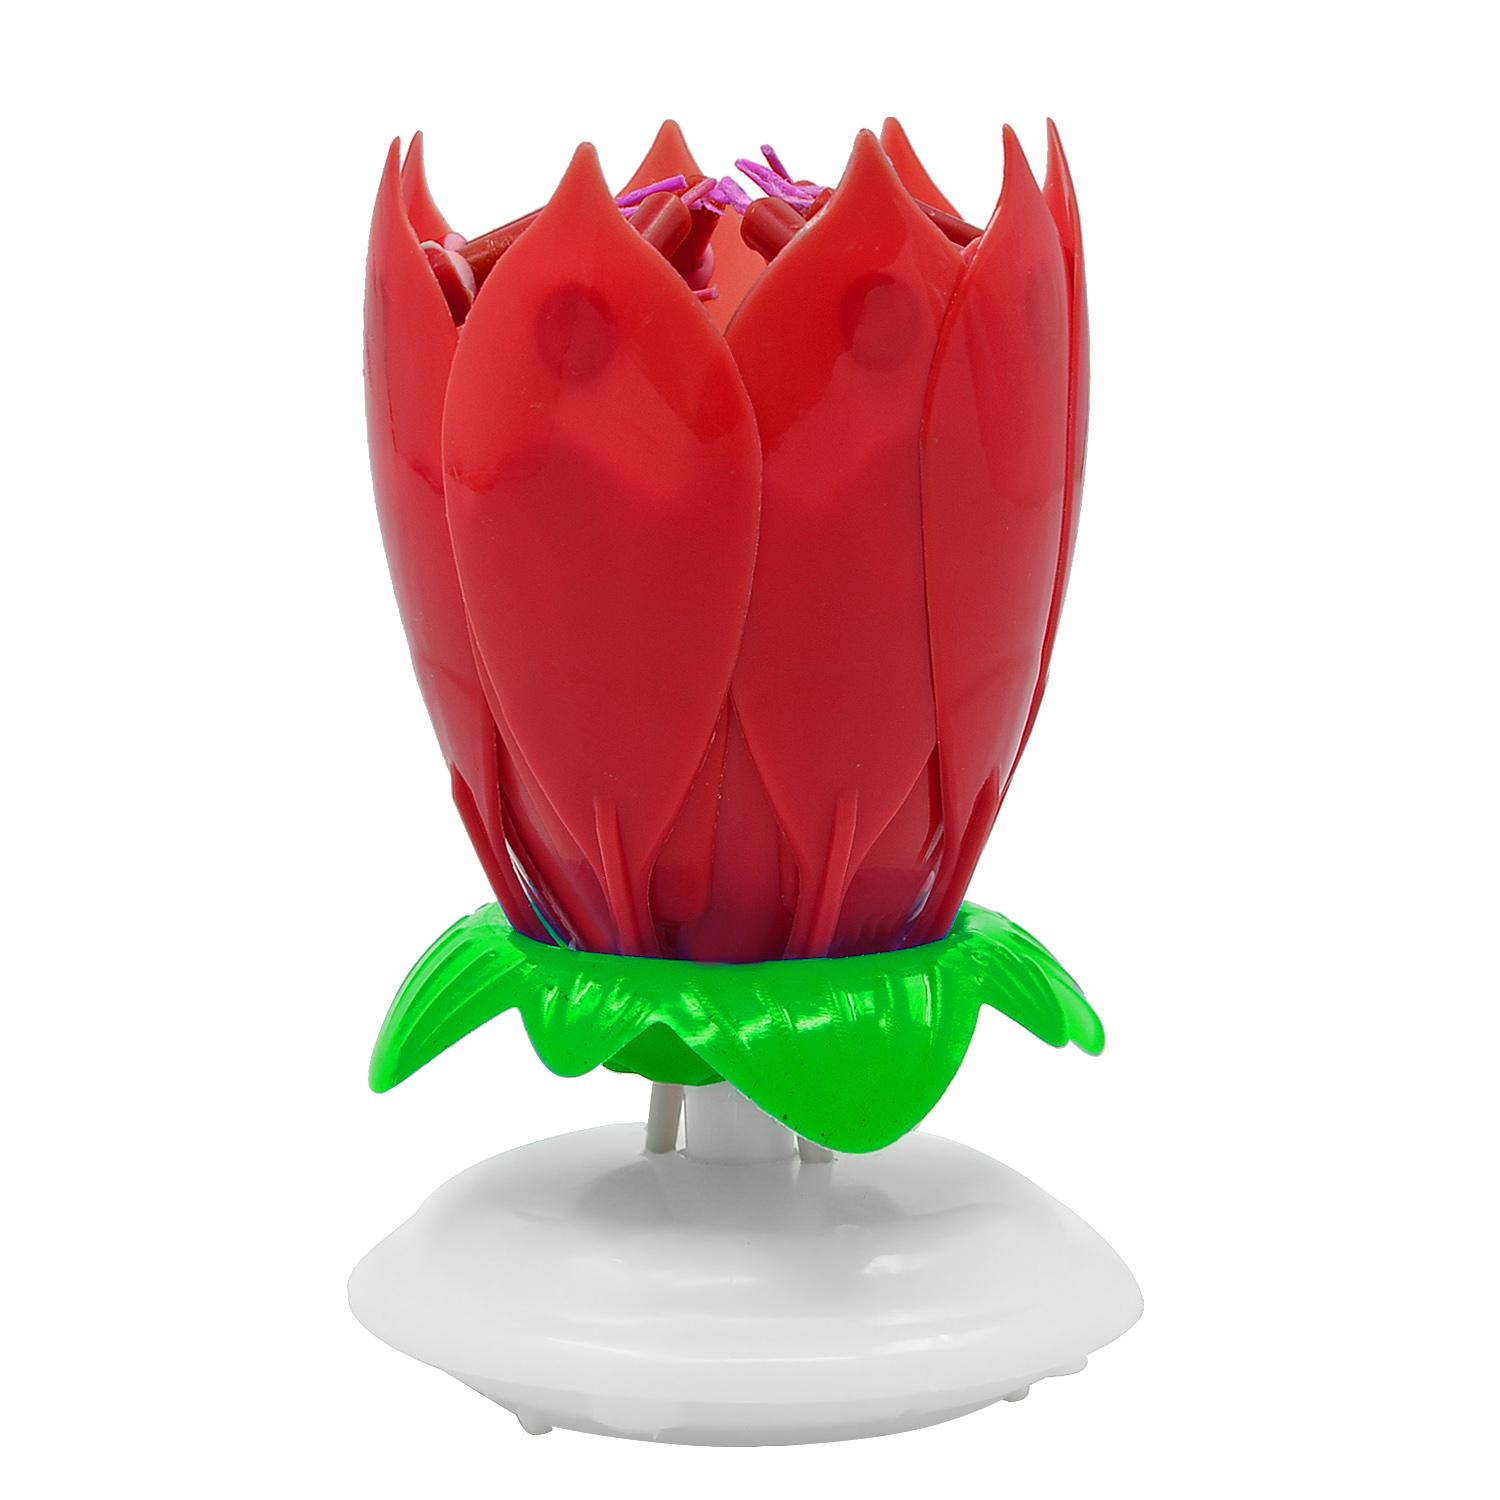 Flower Shaped 2-Layer 14-Candle Birthday Electric Music Paraffin Candle Flaming Flower Candle Red - intl